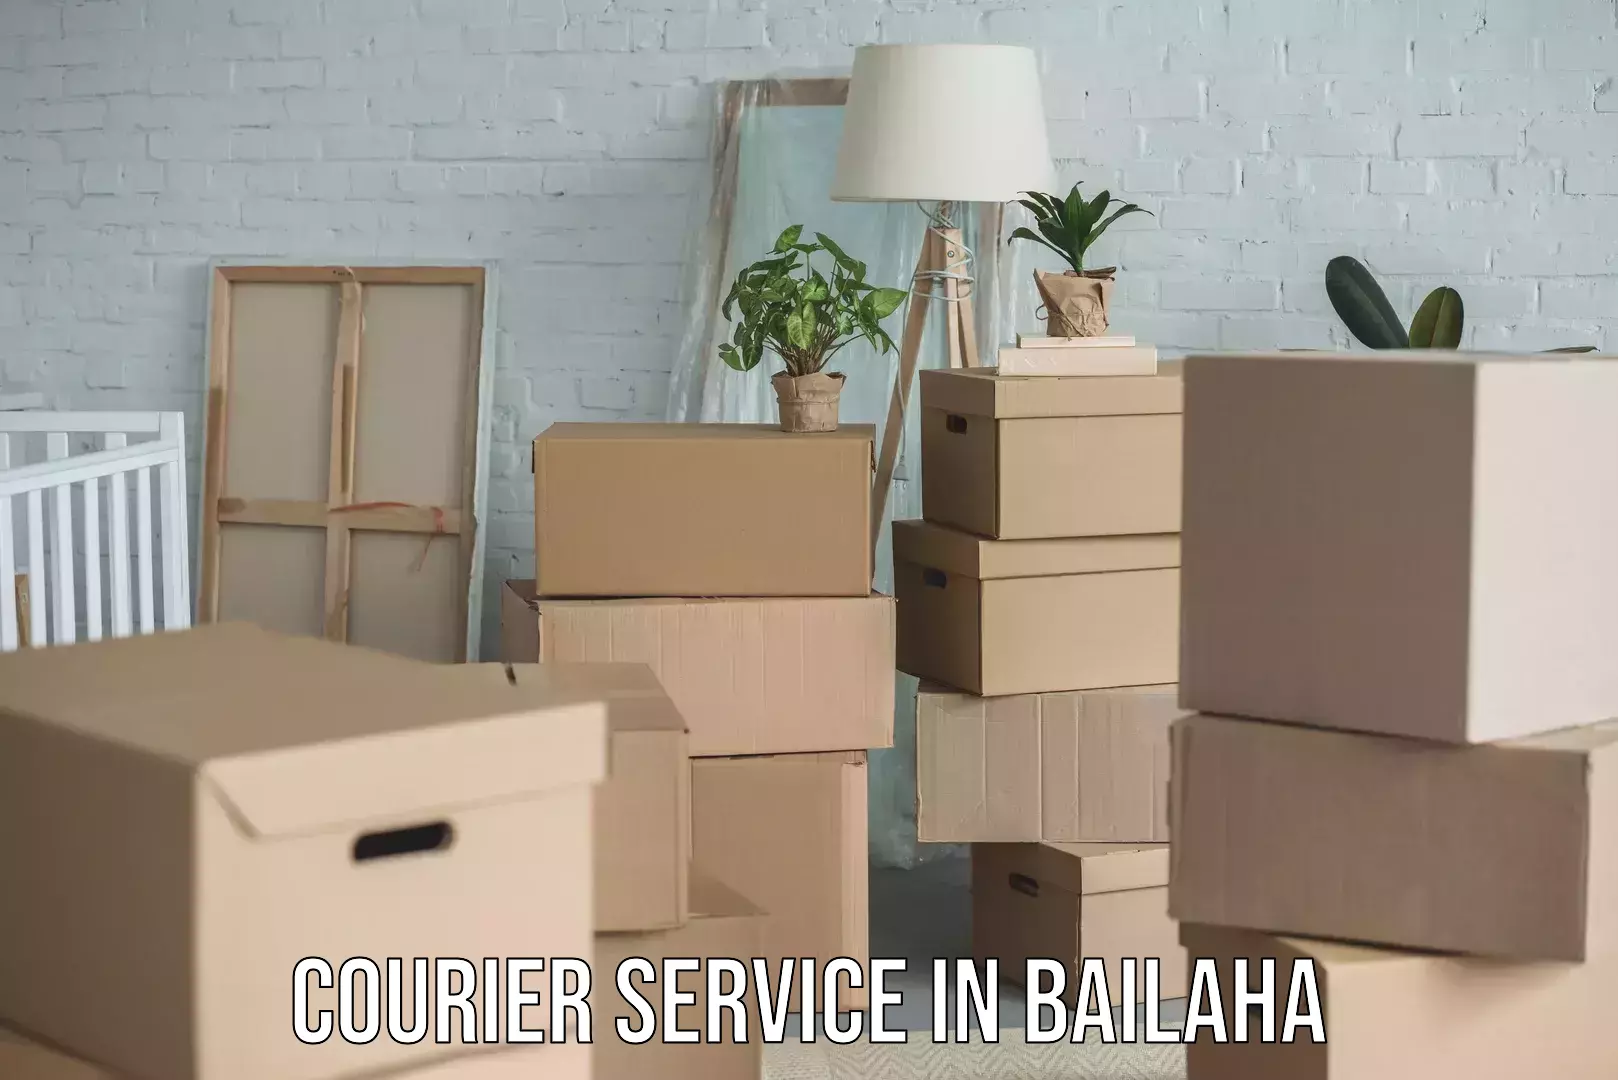 Individual parcel service in Bailaha